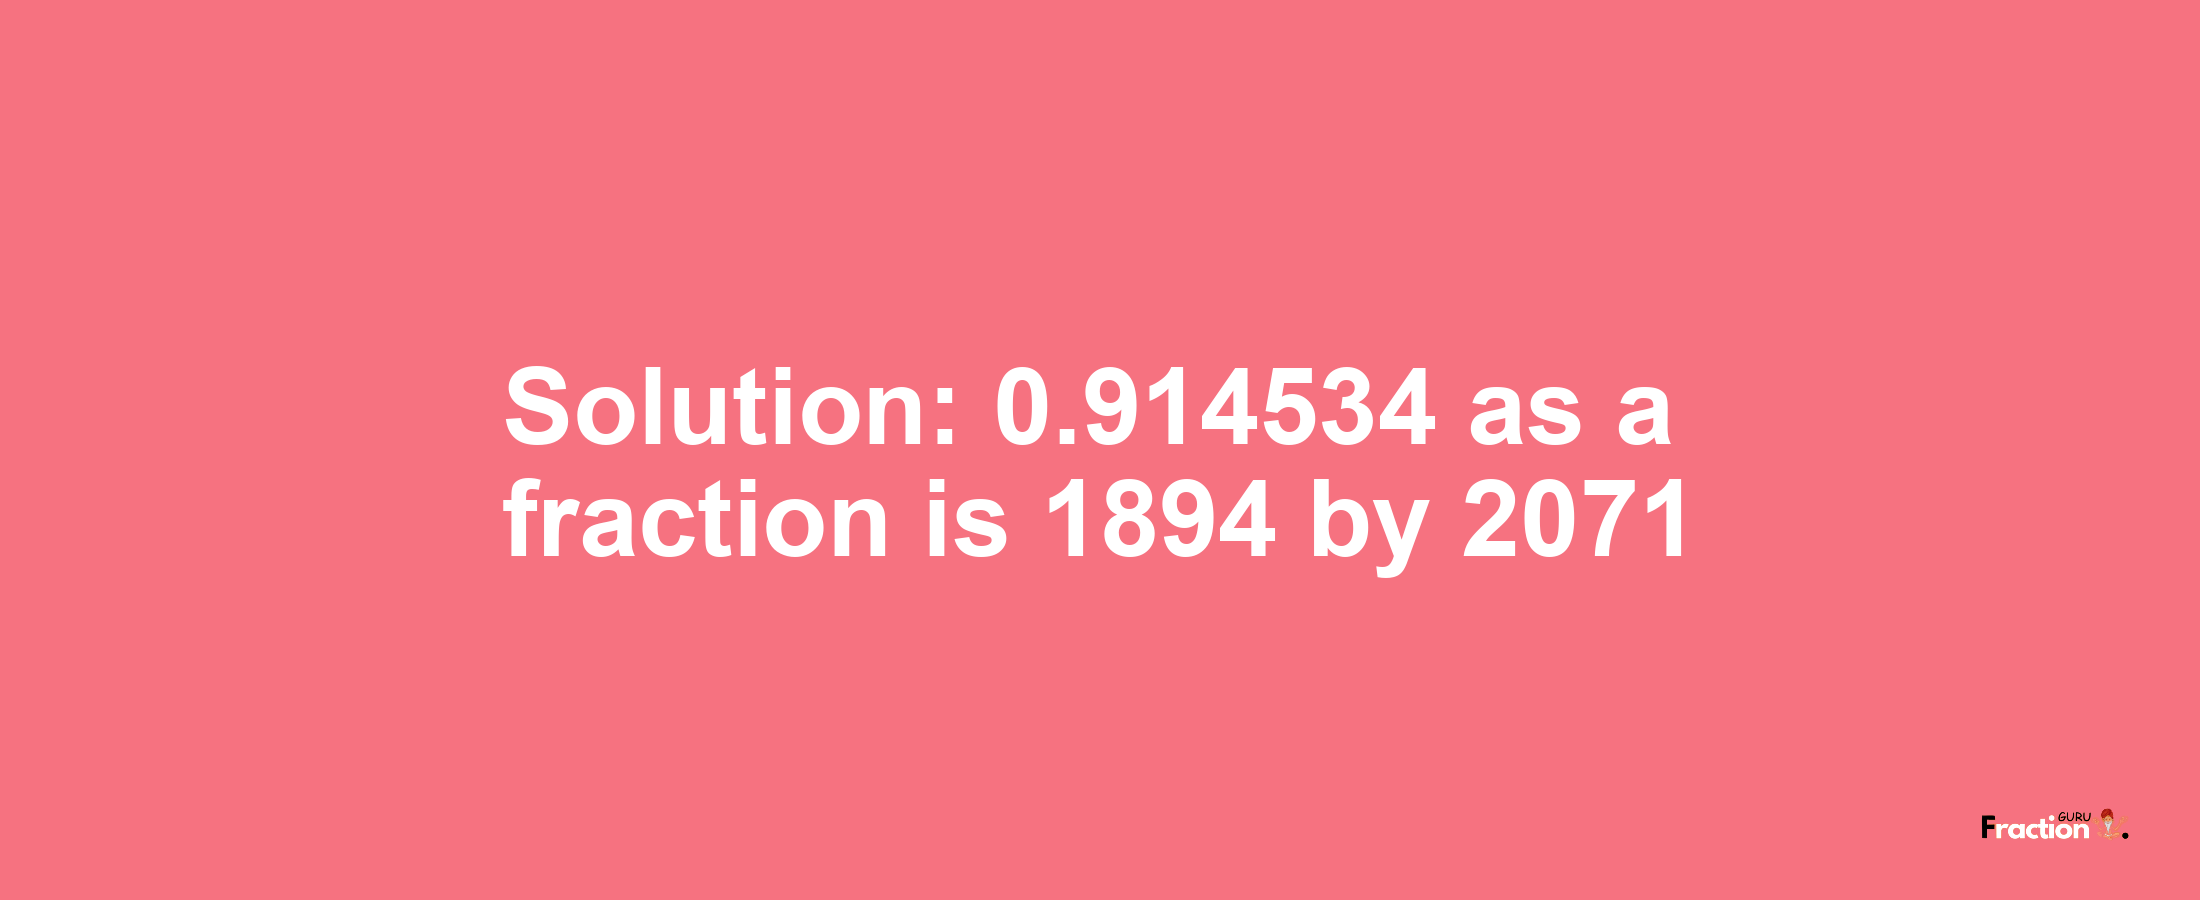 Solution:0.914534 as a fraction is 1894/2071